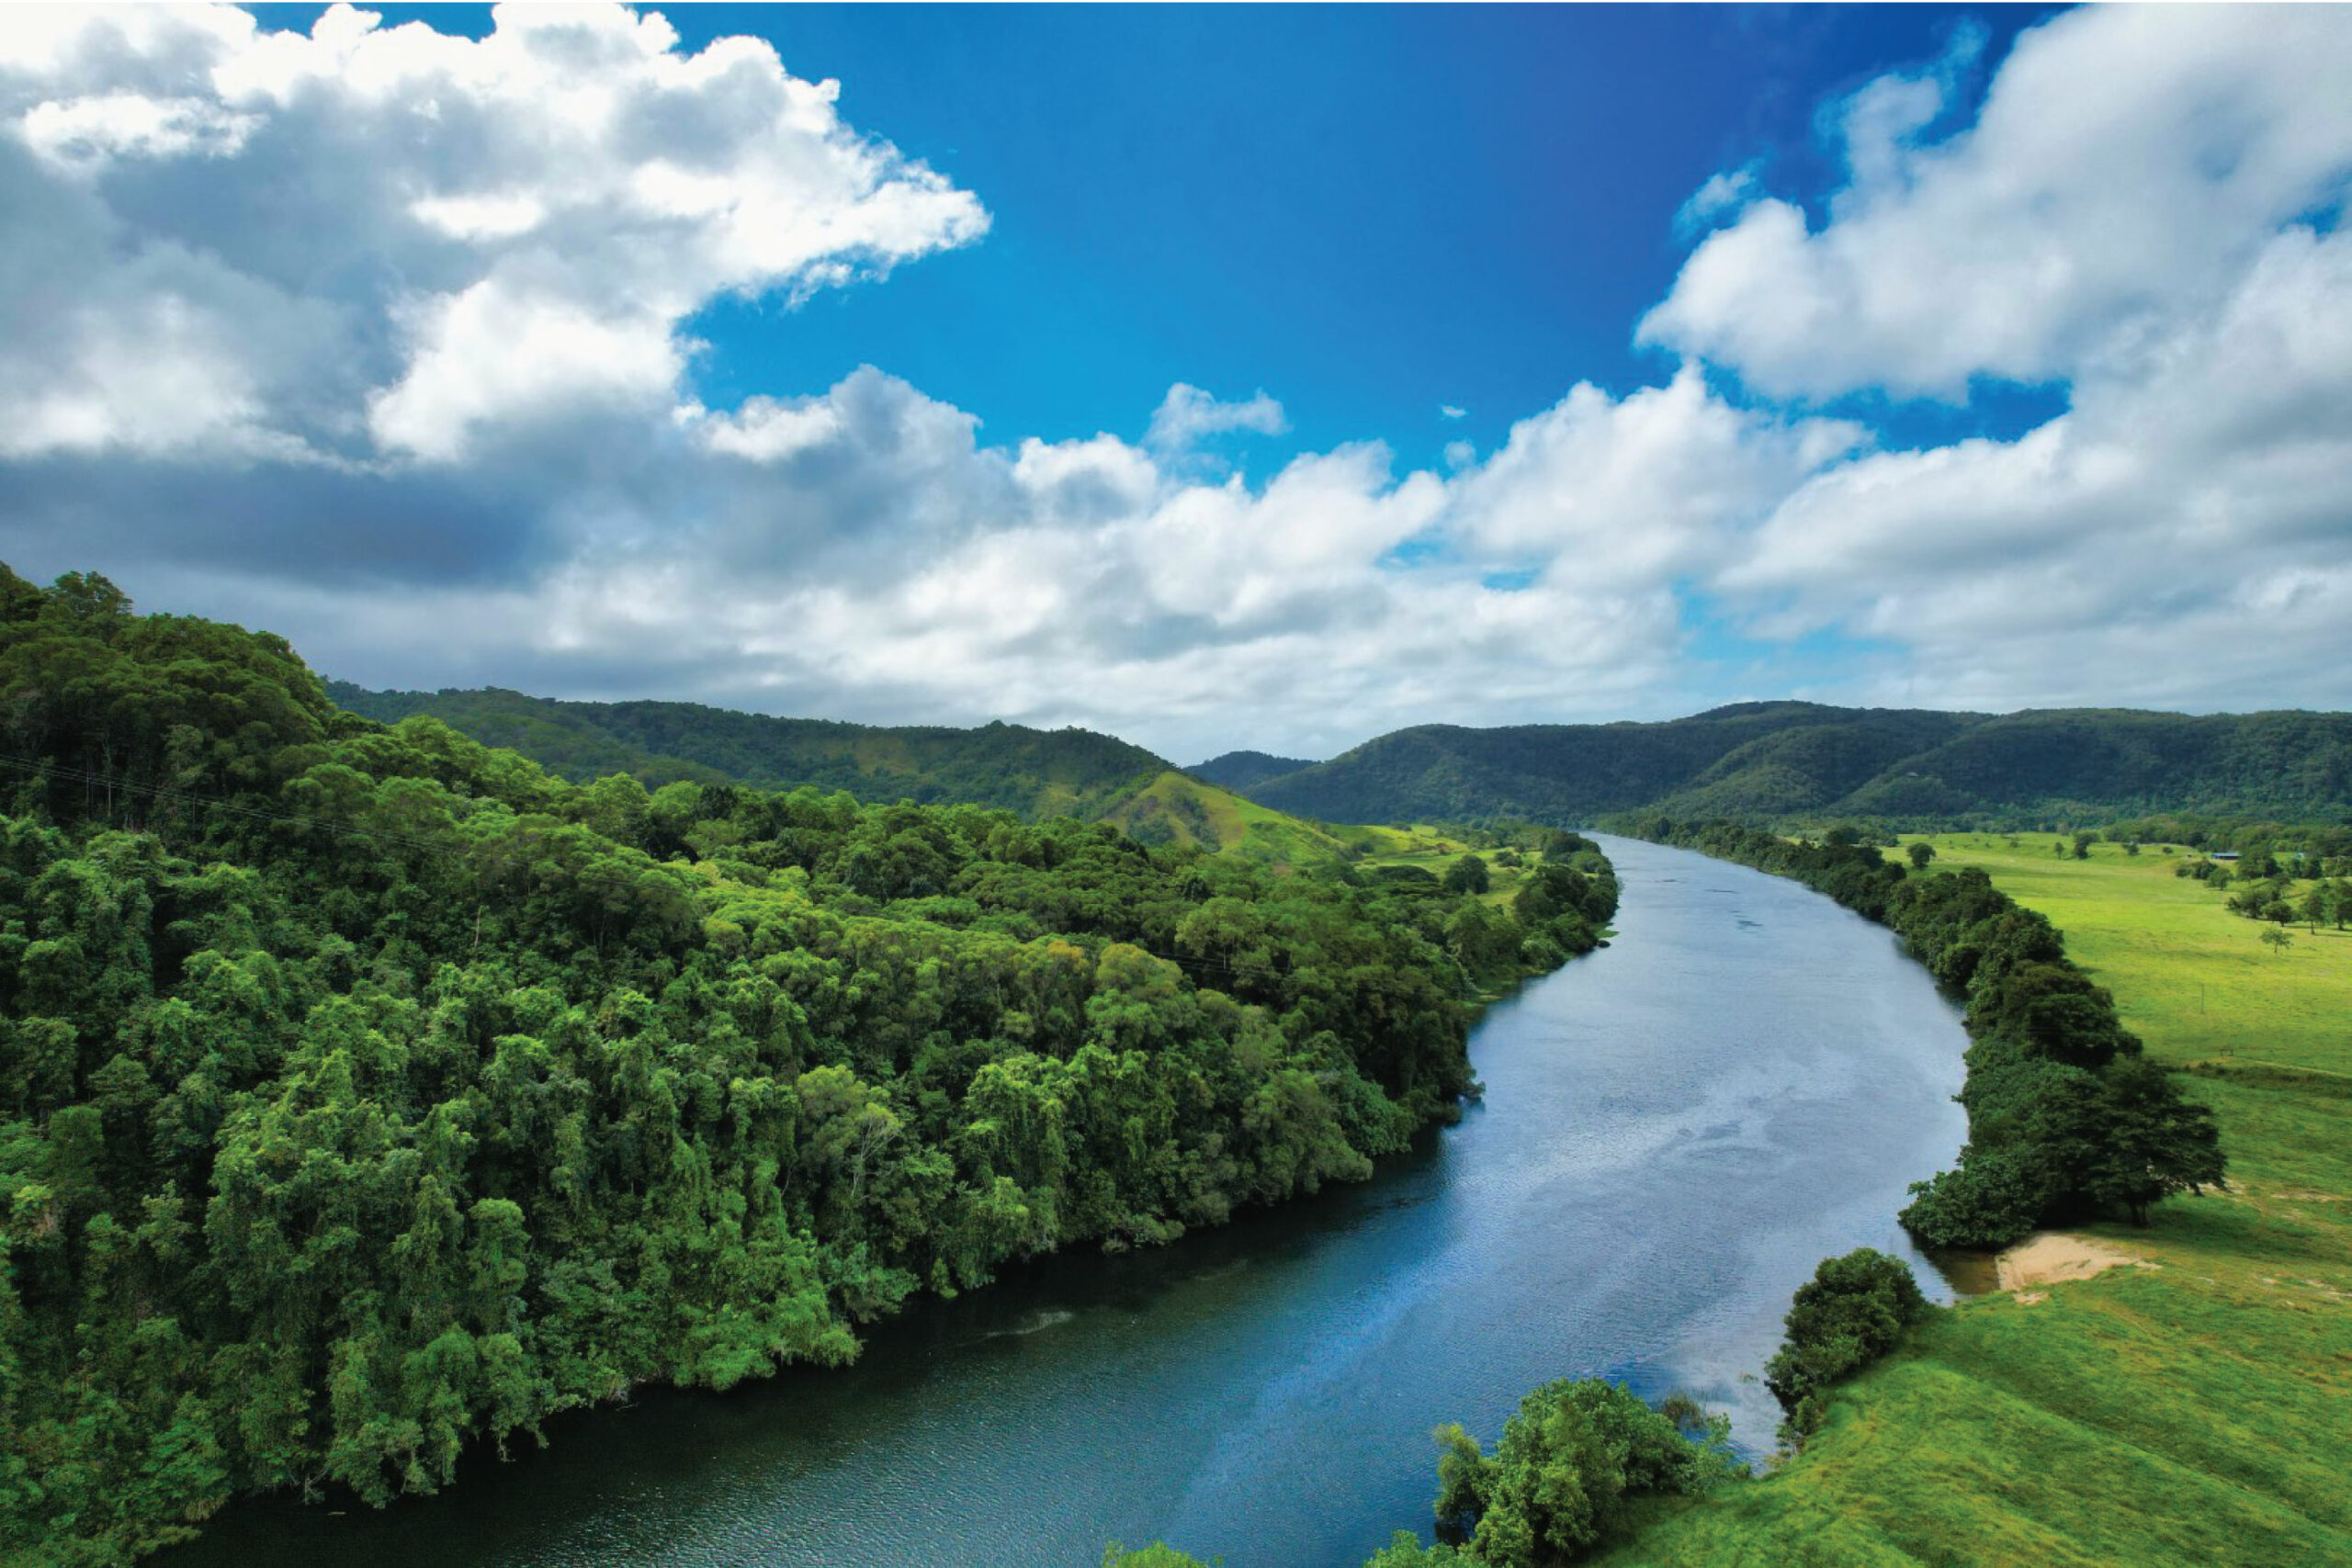 Crocodile Express Daintree River Cruise departing from Daintree Ferry Gateway & Daintree Discovery Centre Unlimited Pass